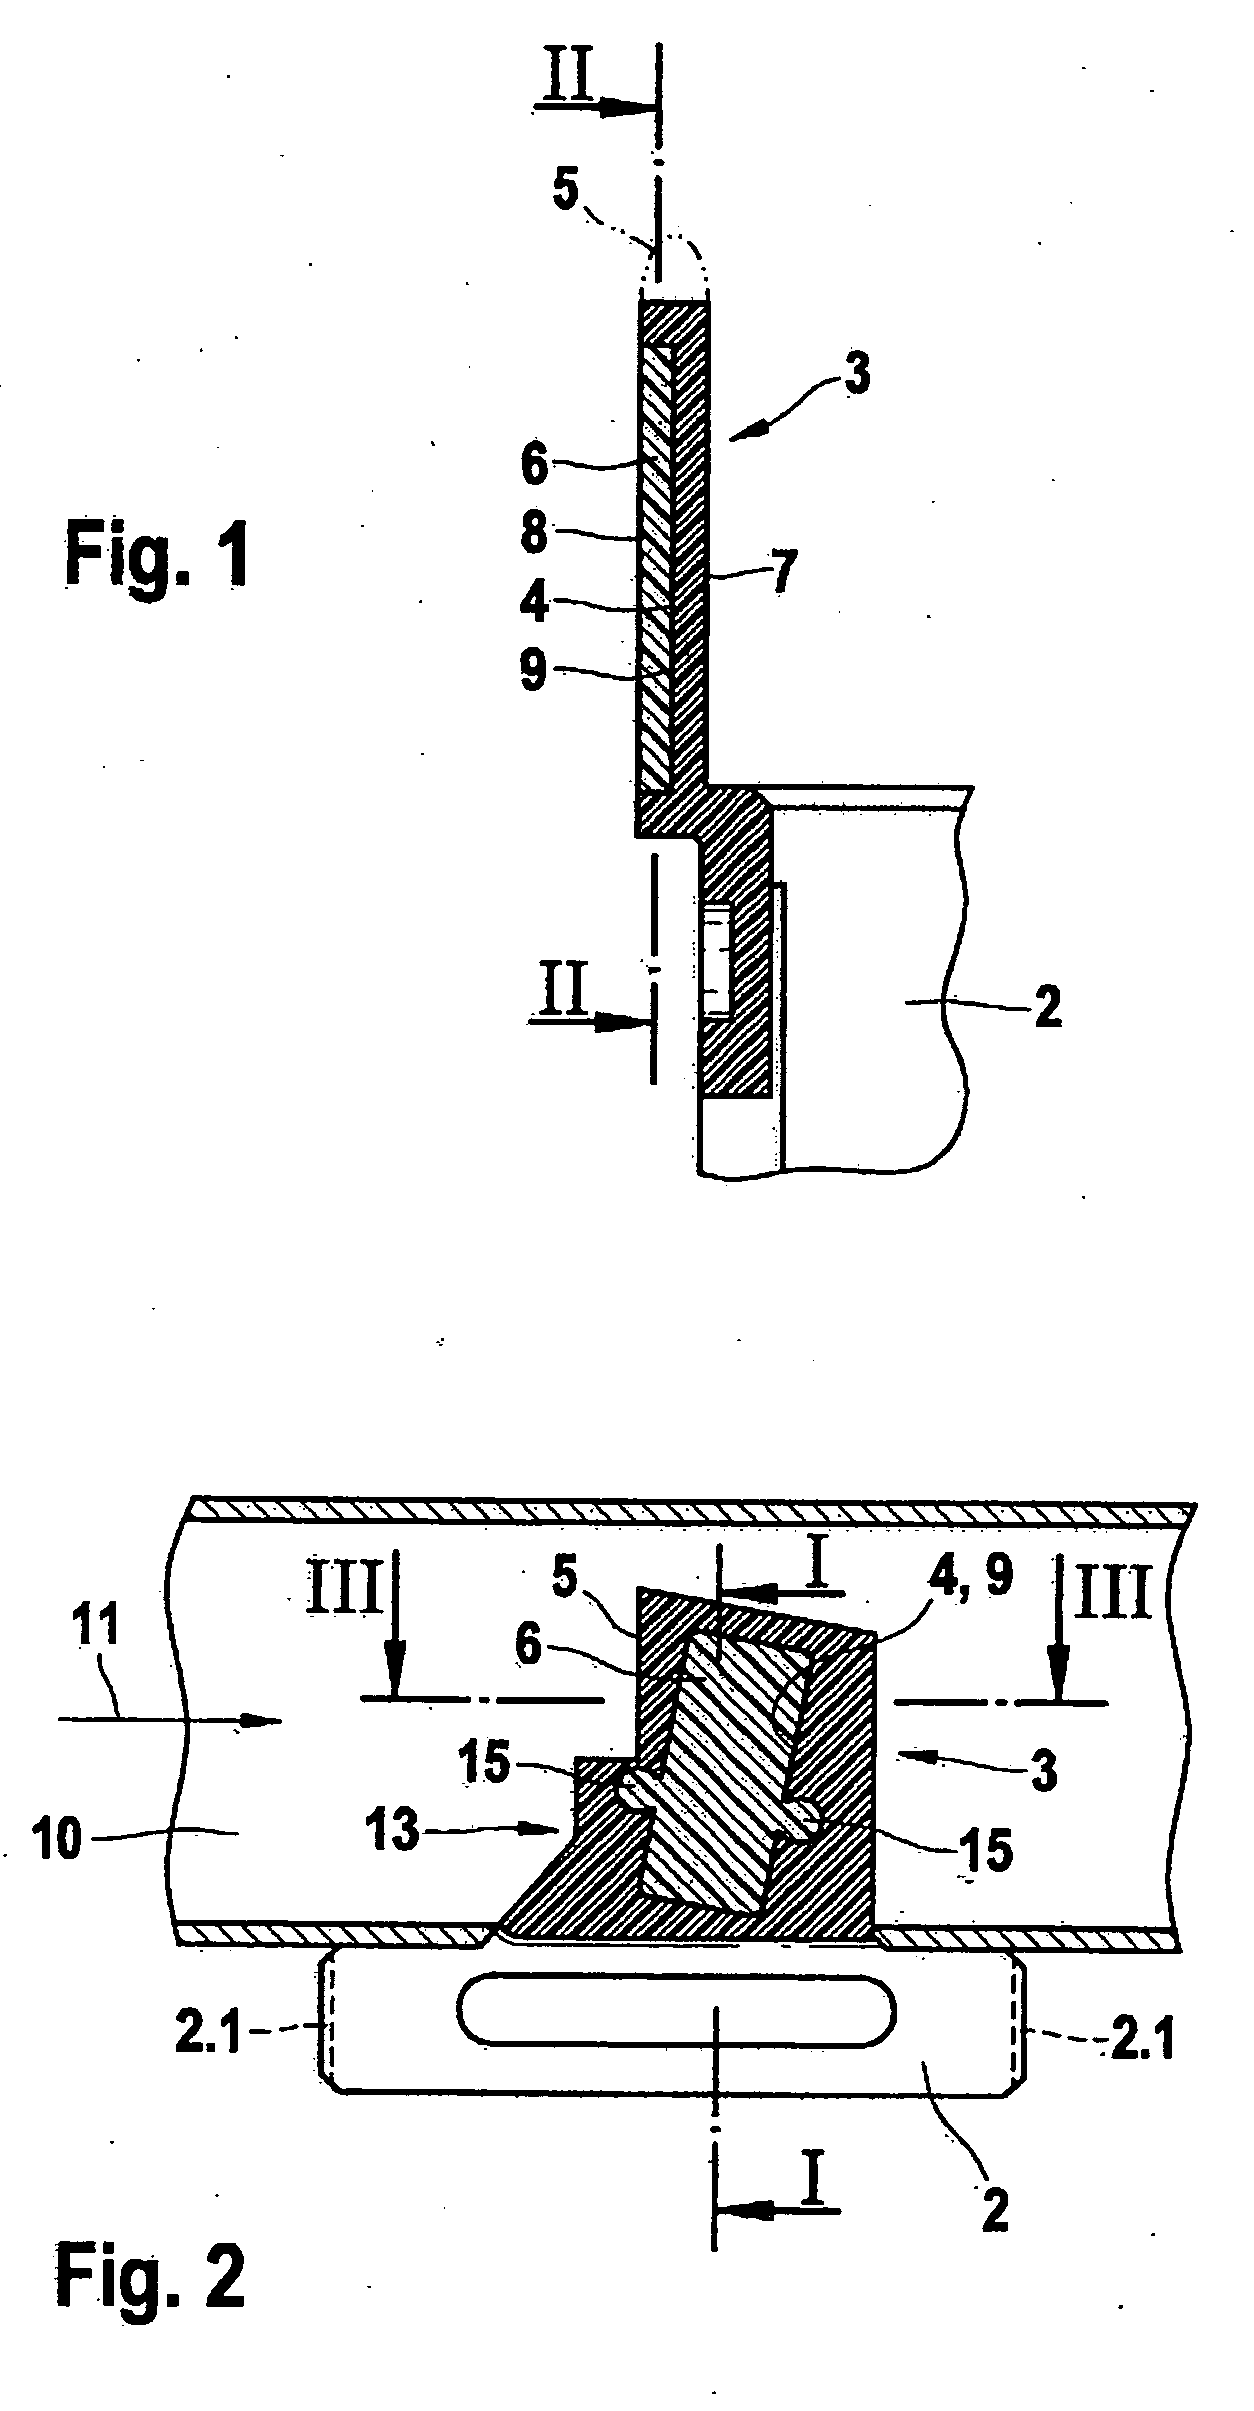 Printed-circuit board having a plastic part for accommodating a measuring device